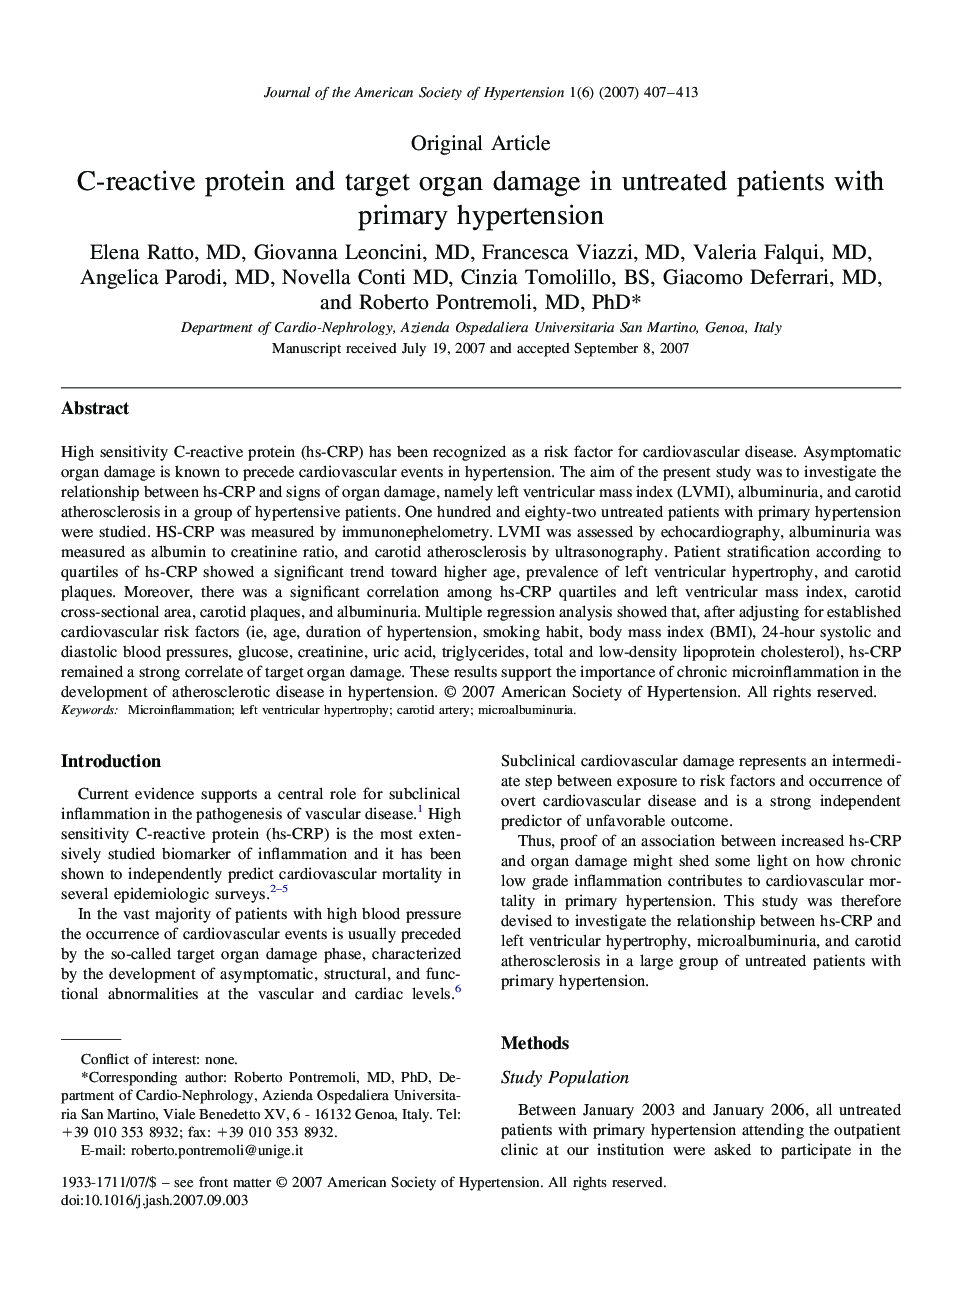 C-reactive protein and target organ damage in untreated patients with primary hypertension 